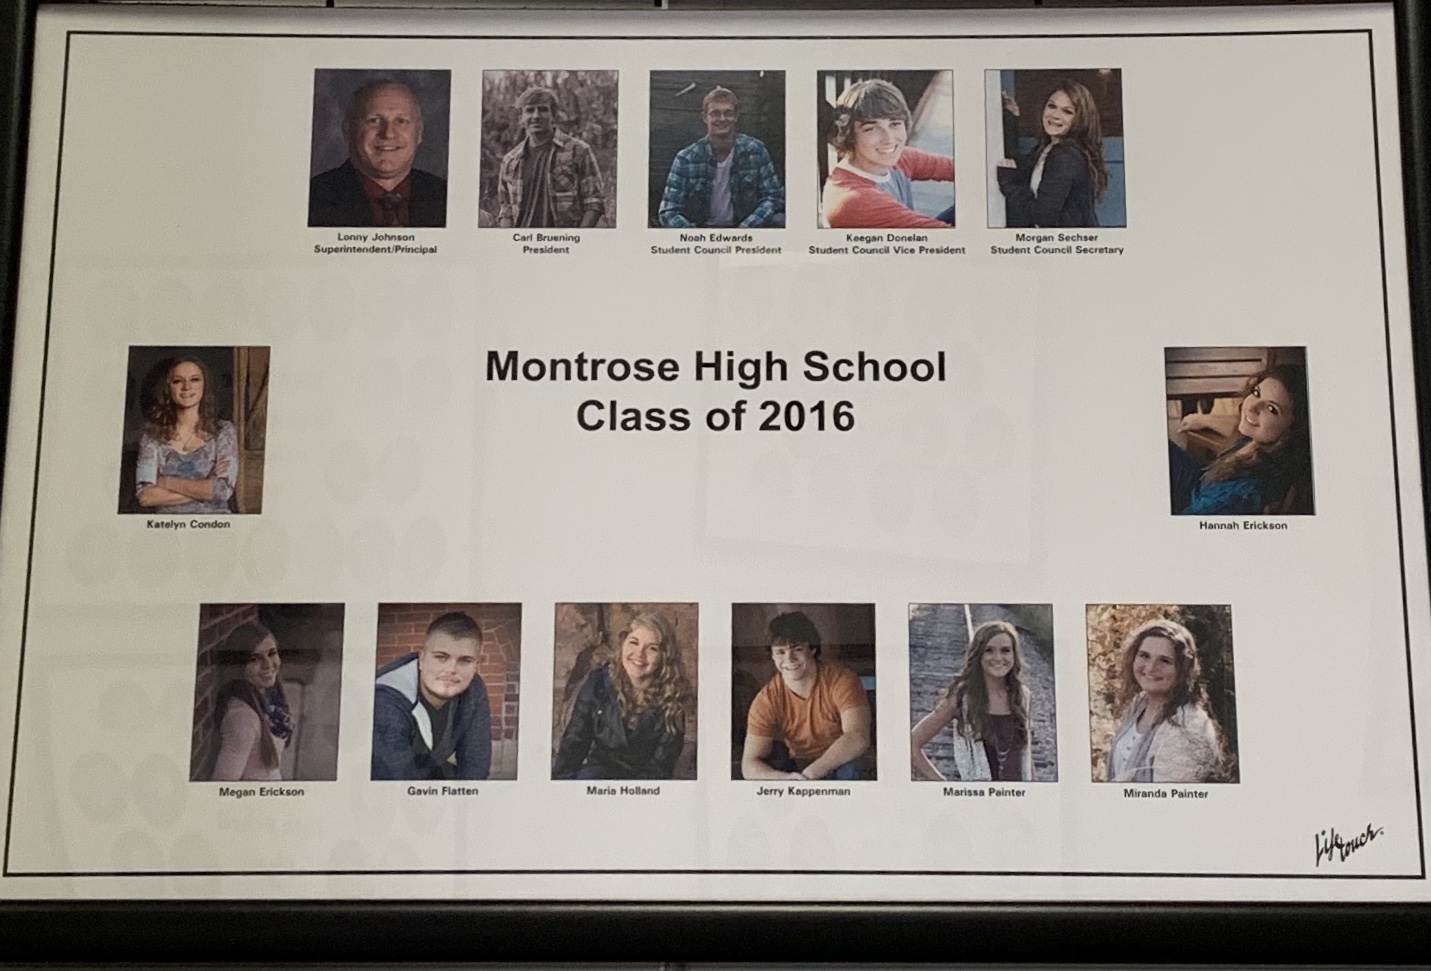 Photos of the Class of 2016.